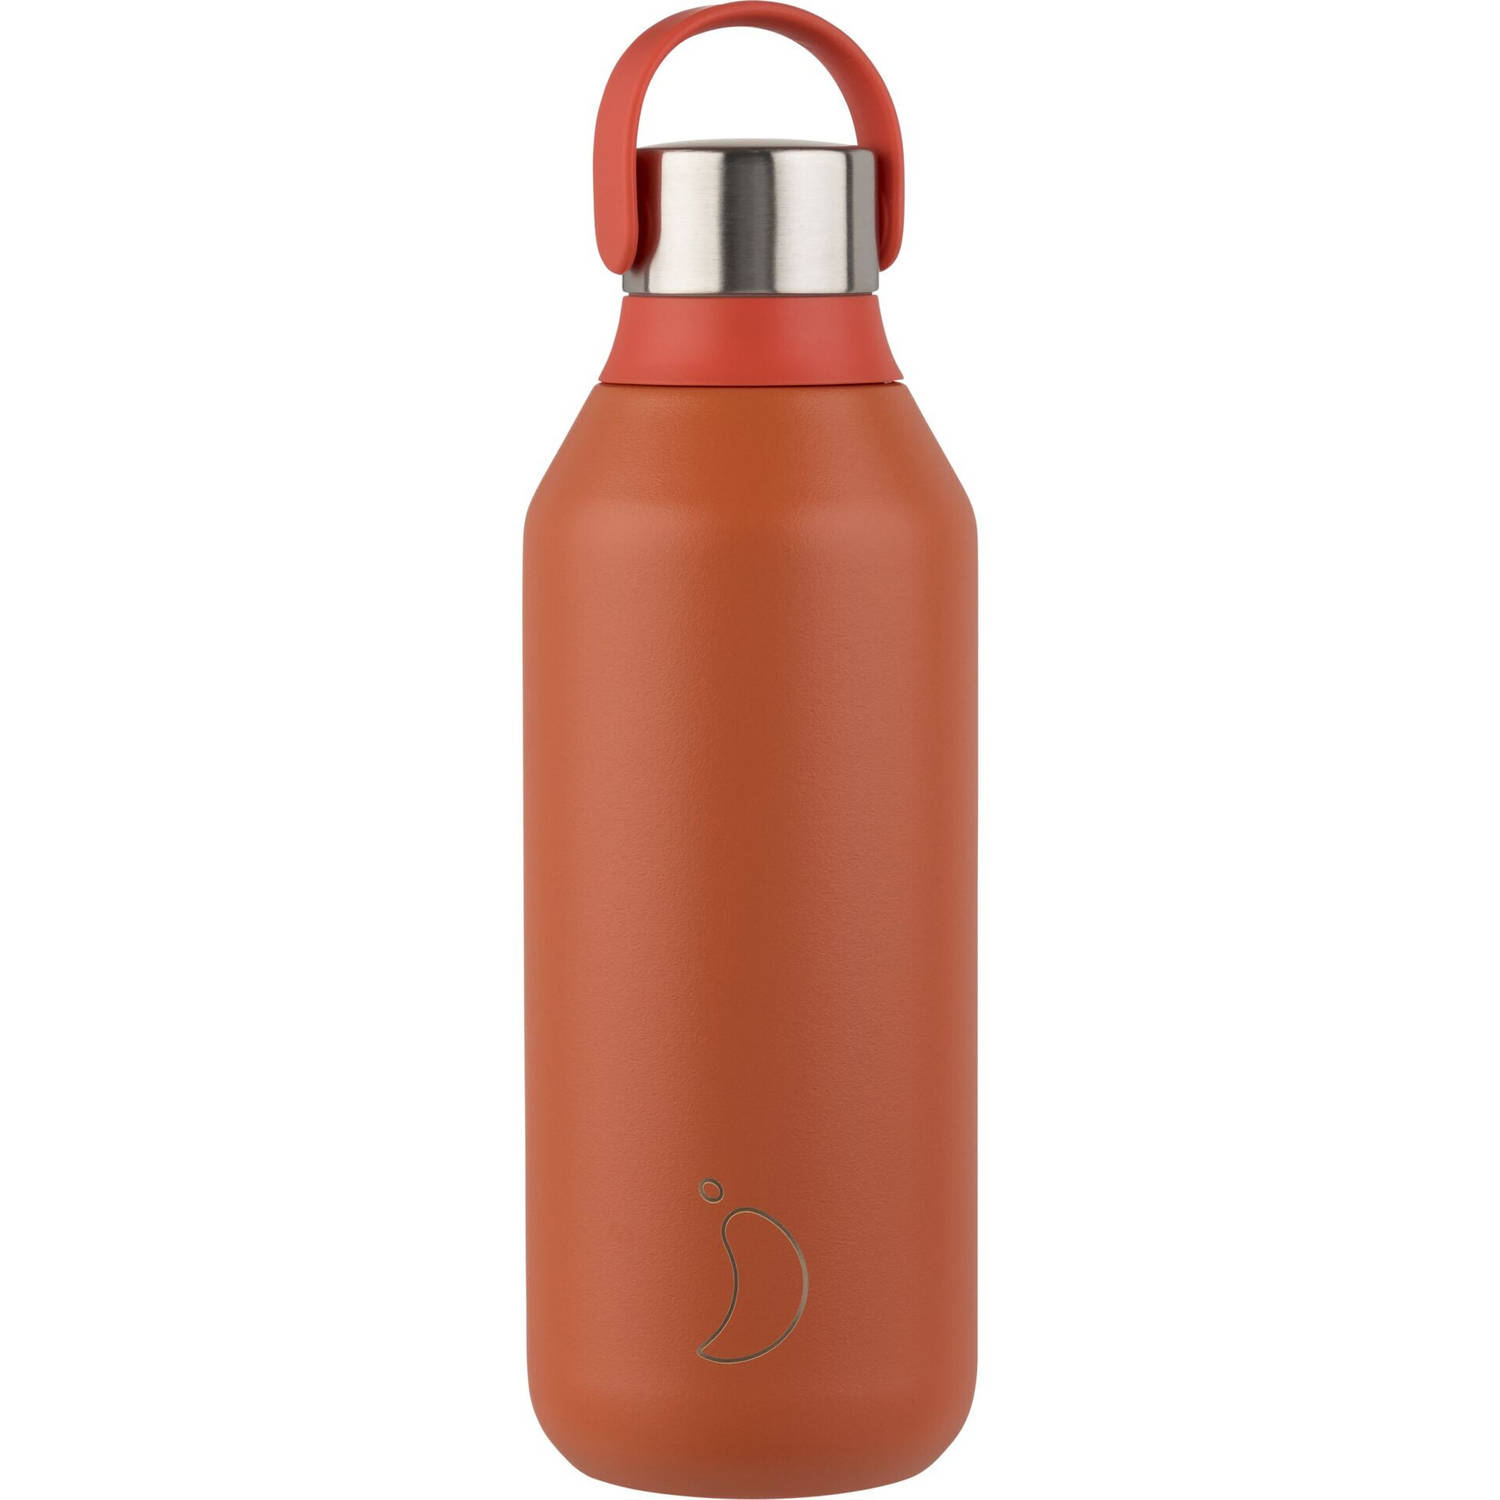 Chillys Series 2 thermosfles rood 500 ml